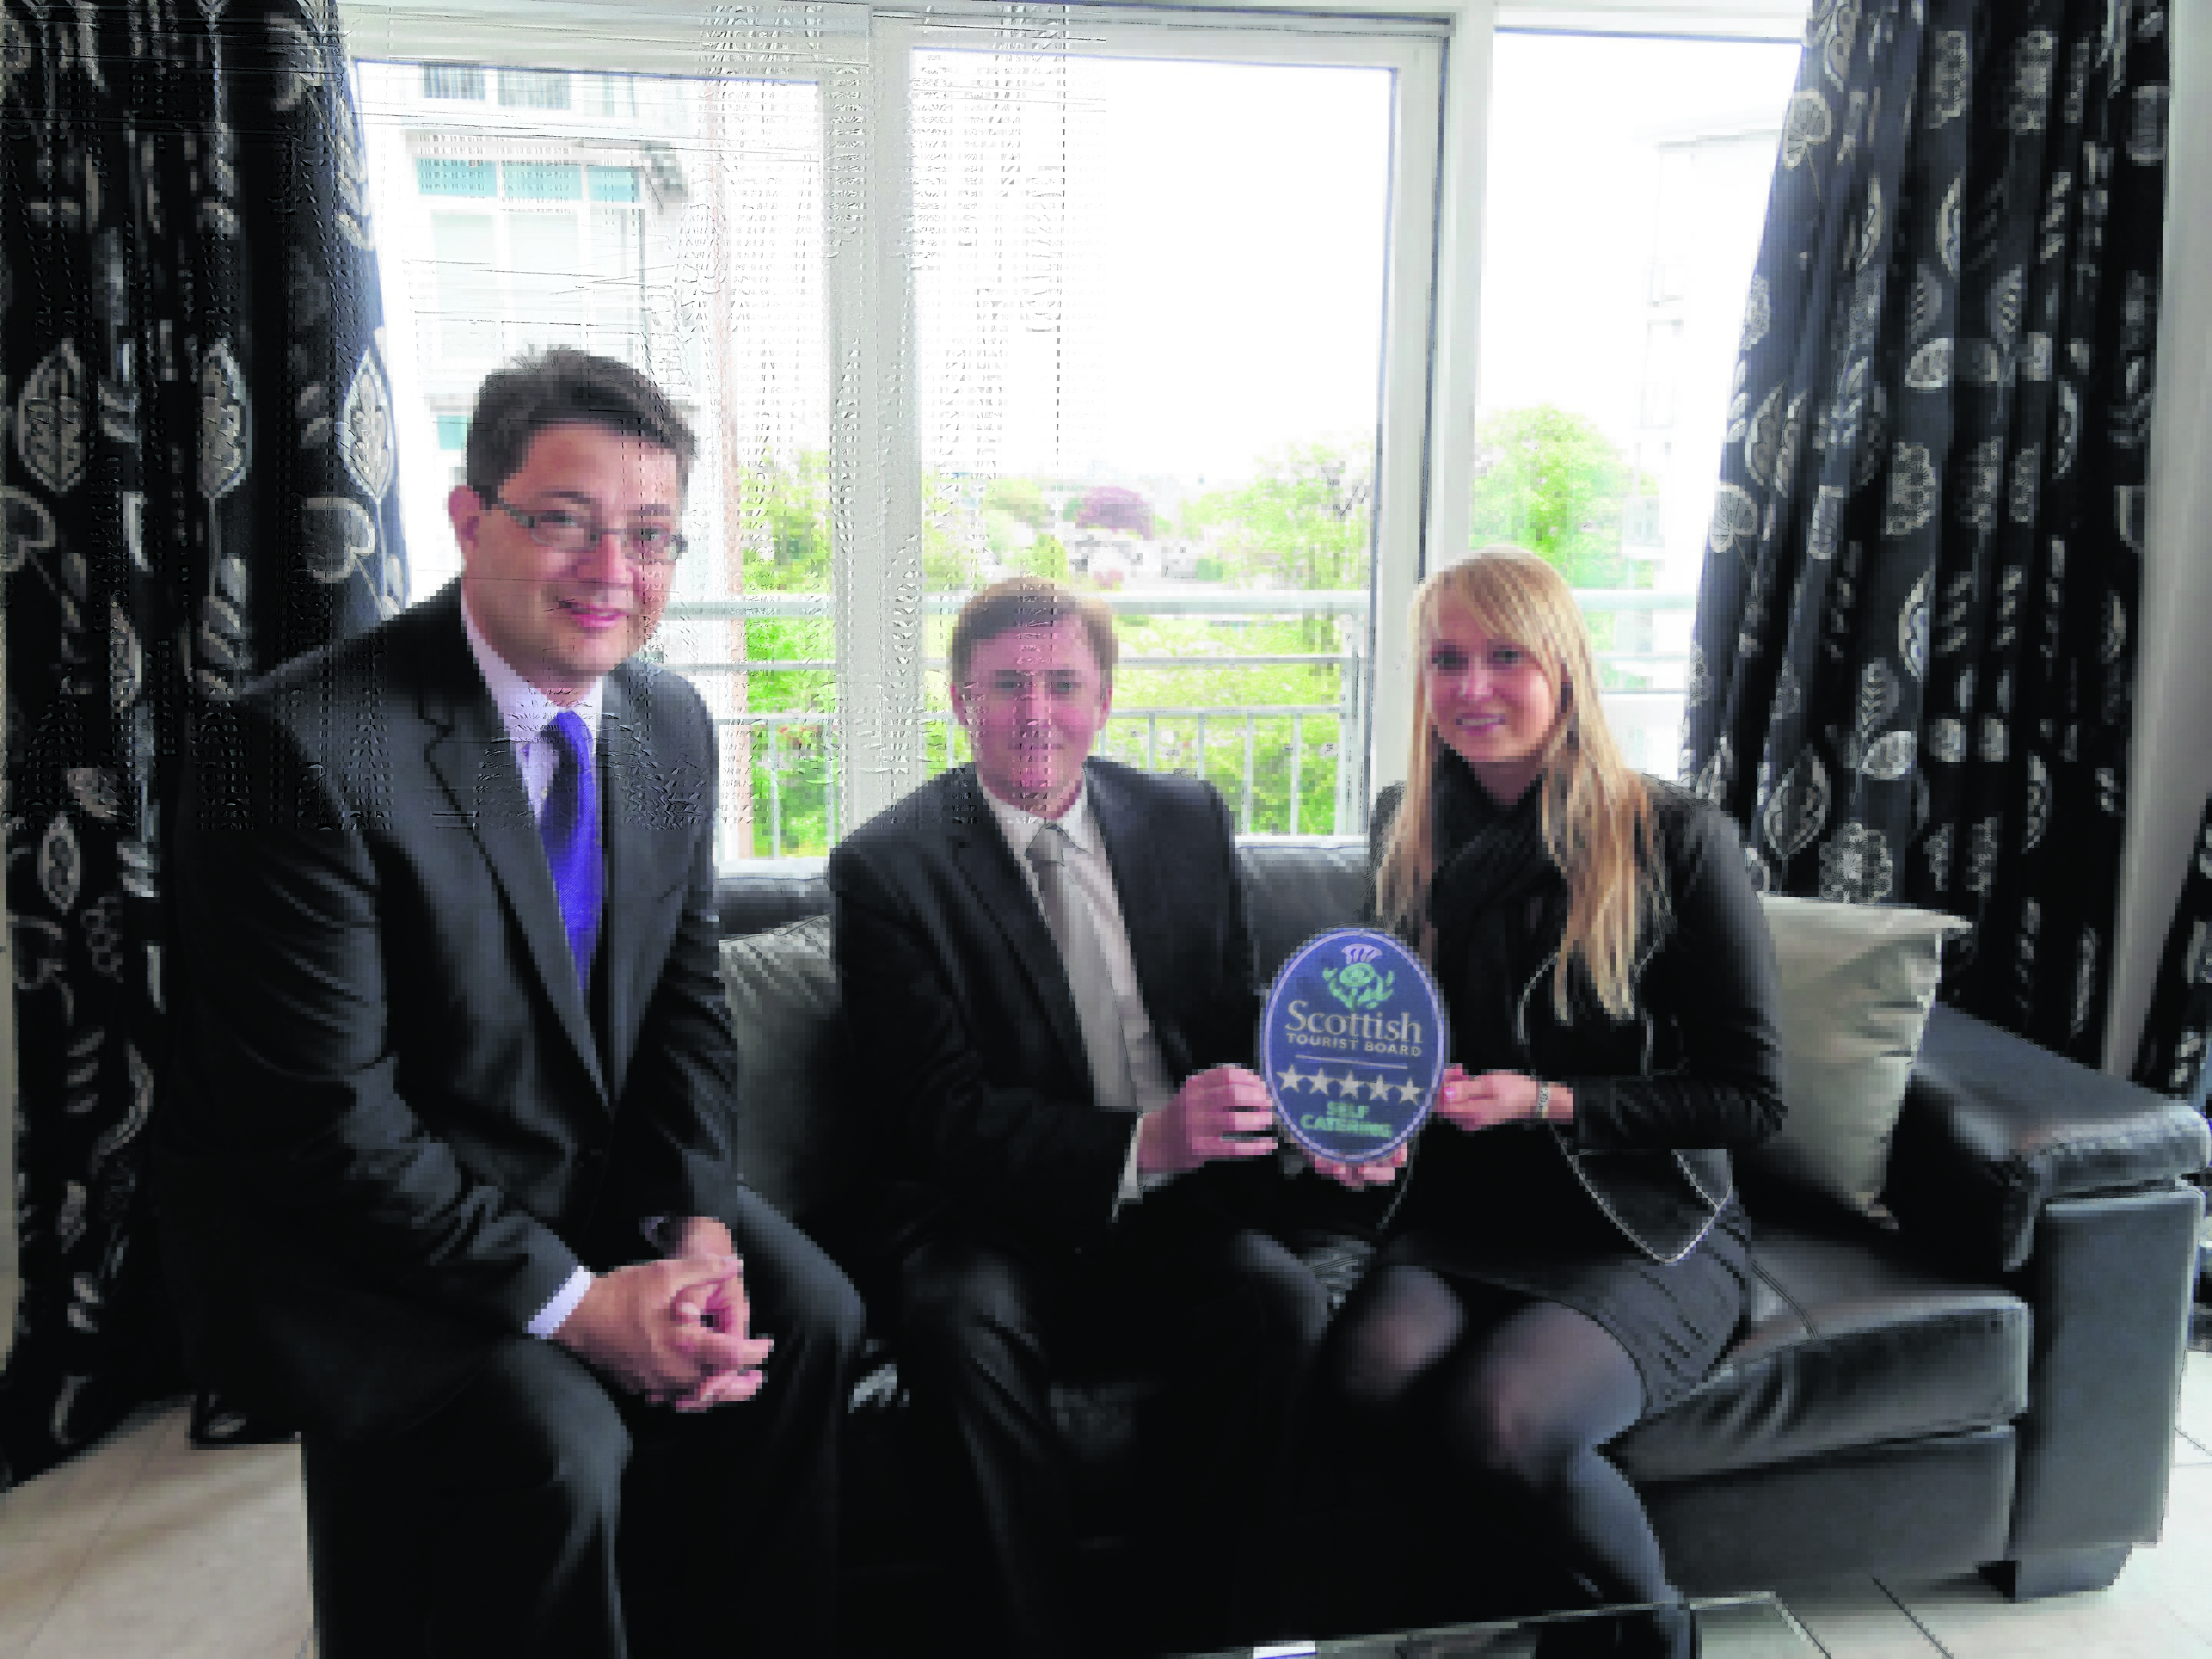 Philip Smith, VisitScotland Regional Director, with Duncan Kerr and Rita Valiukaite, from AM-PM Leasing & Property Management